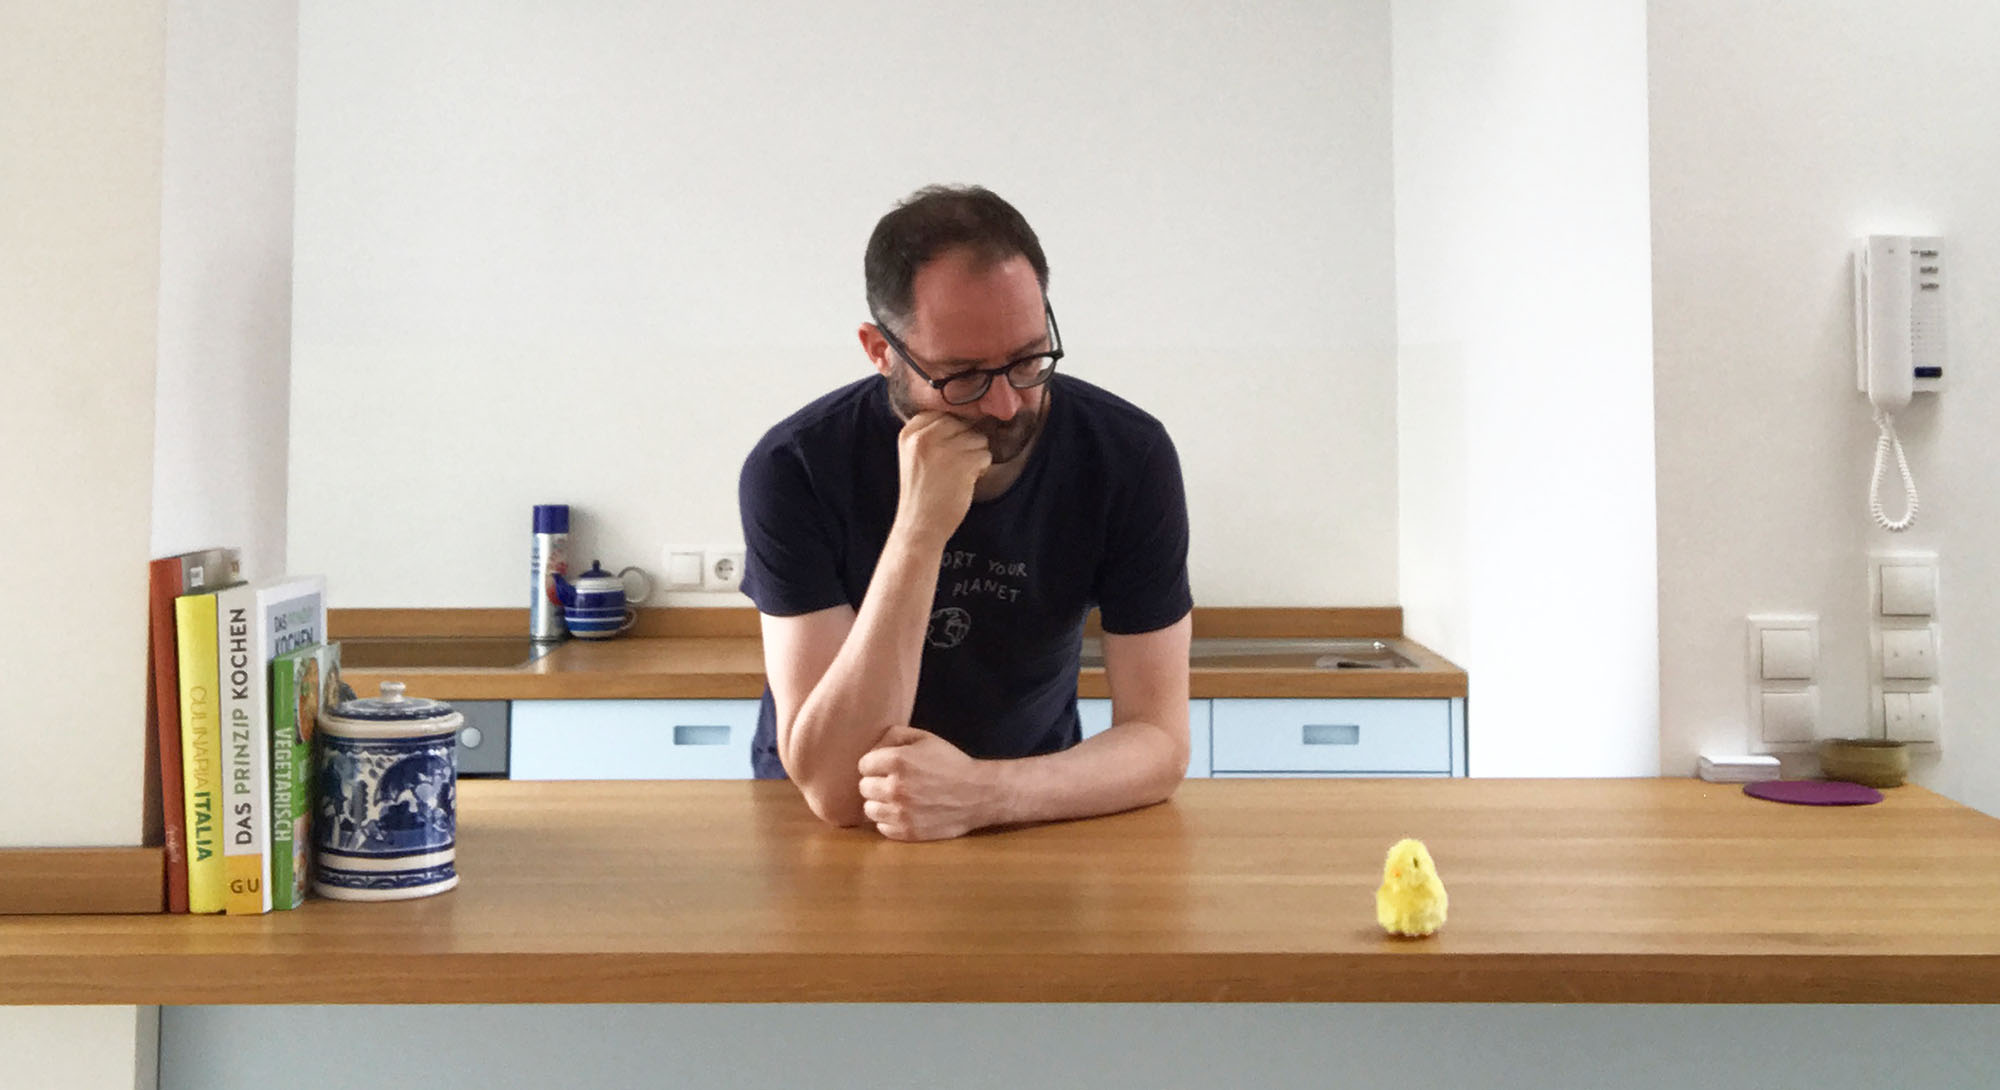 Martin having a heart-to-heart with a small yellow chick in the kitchen